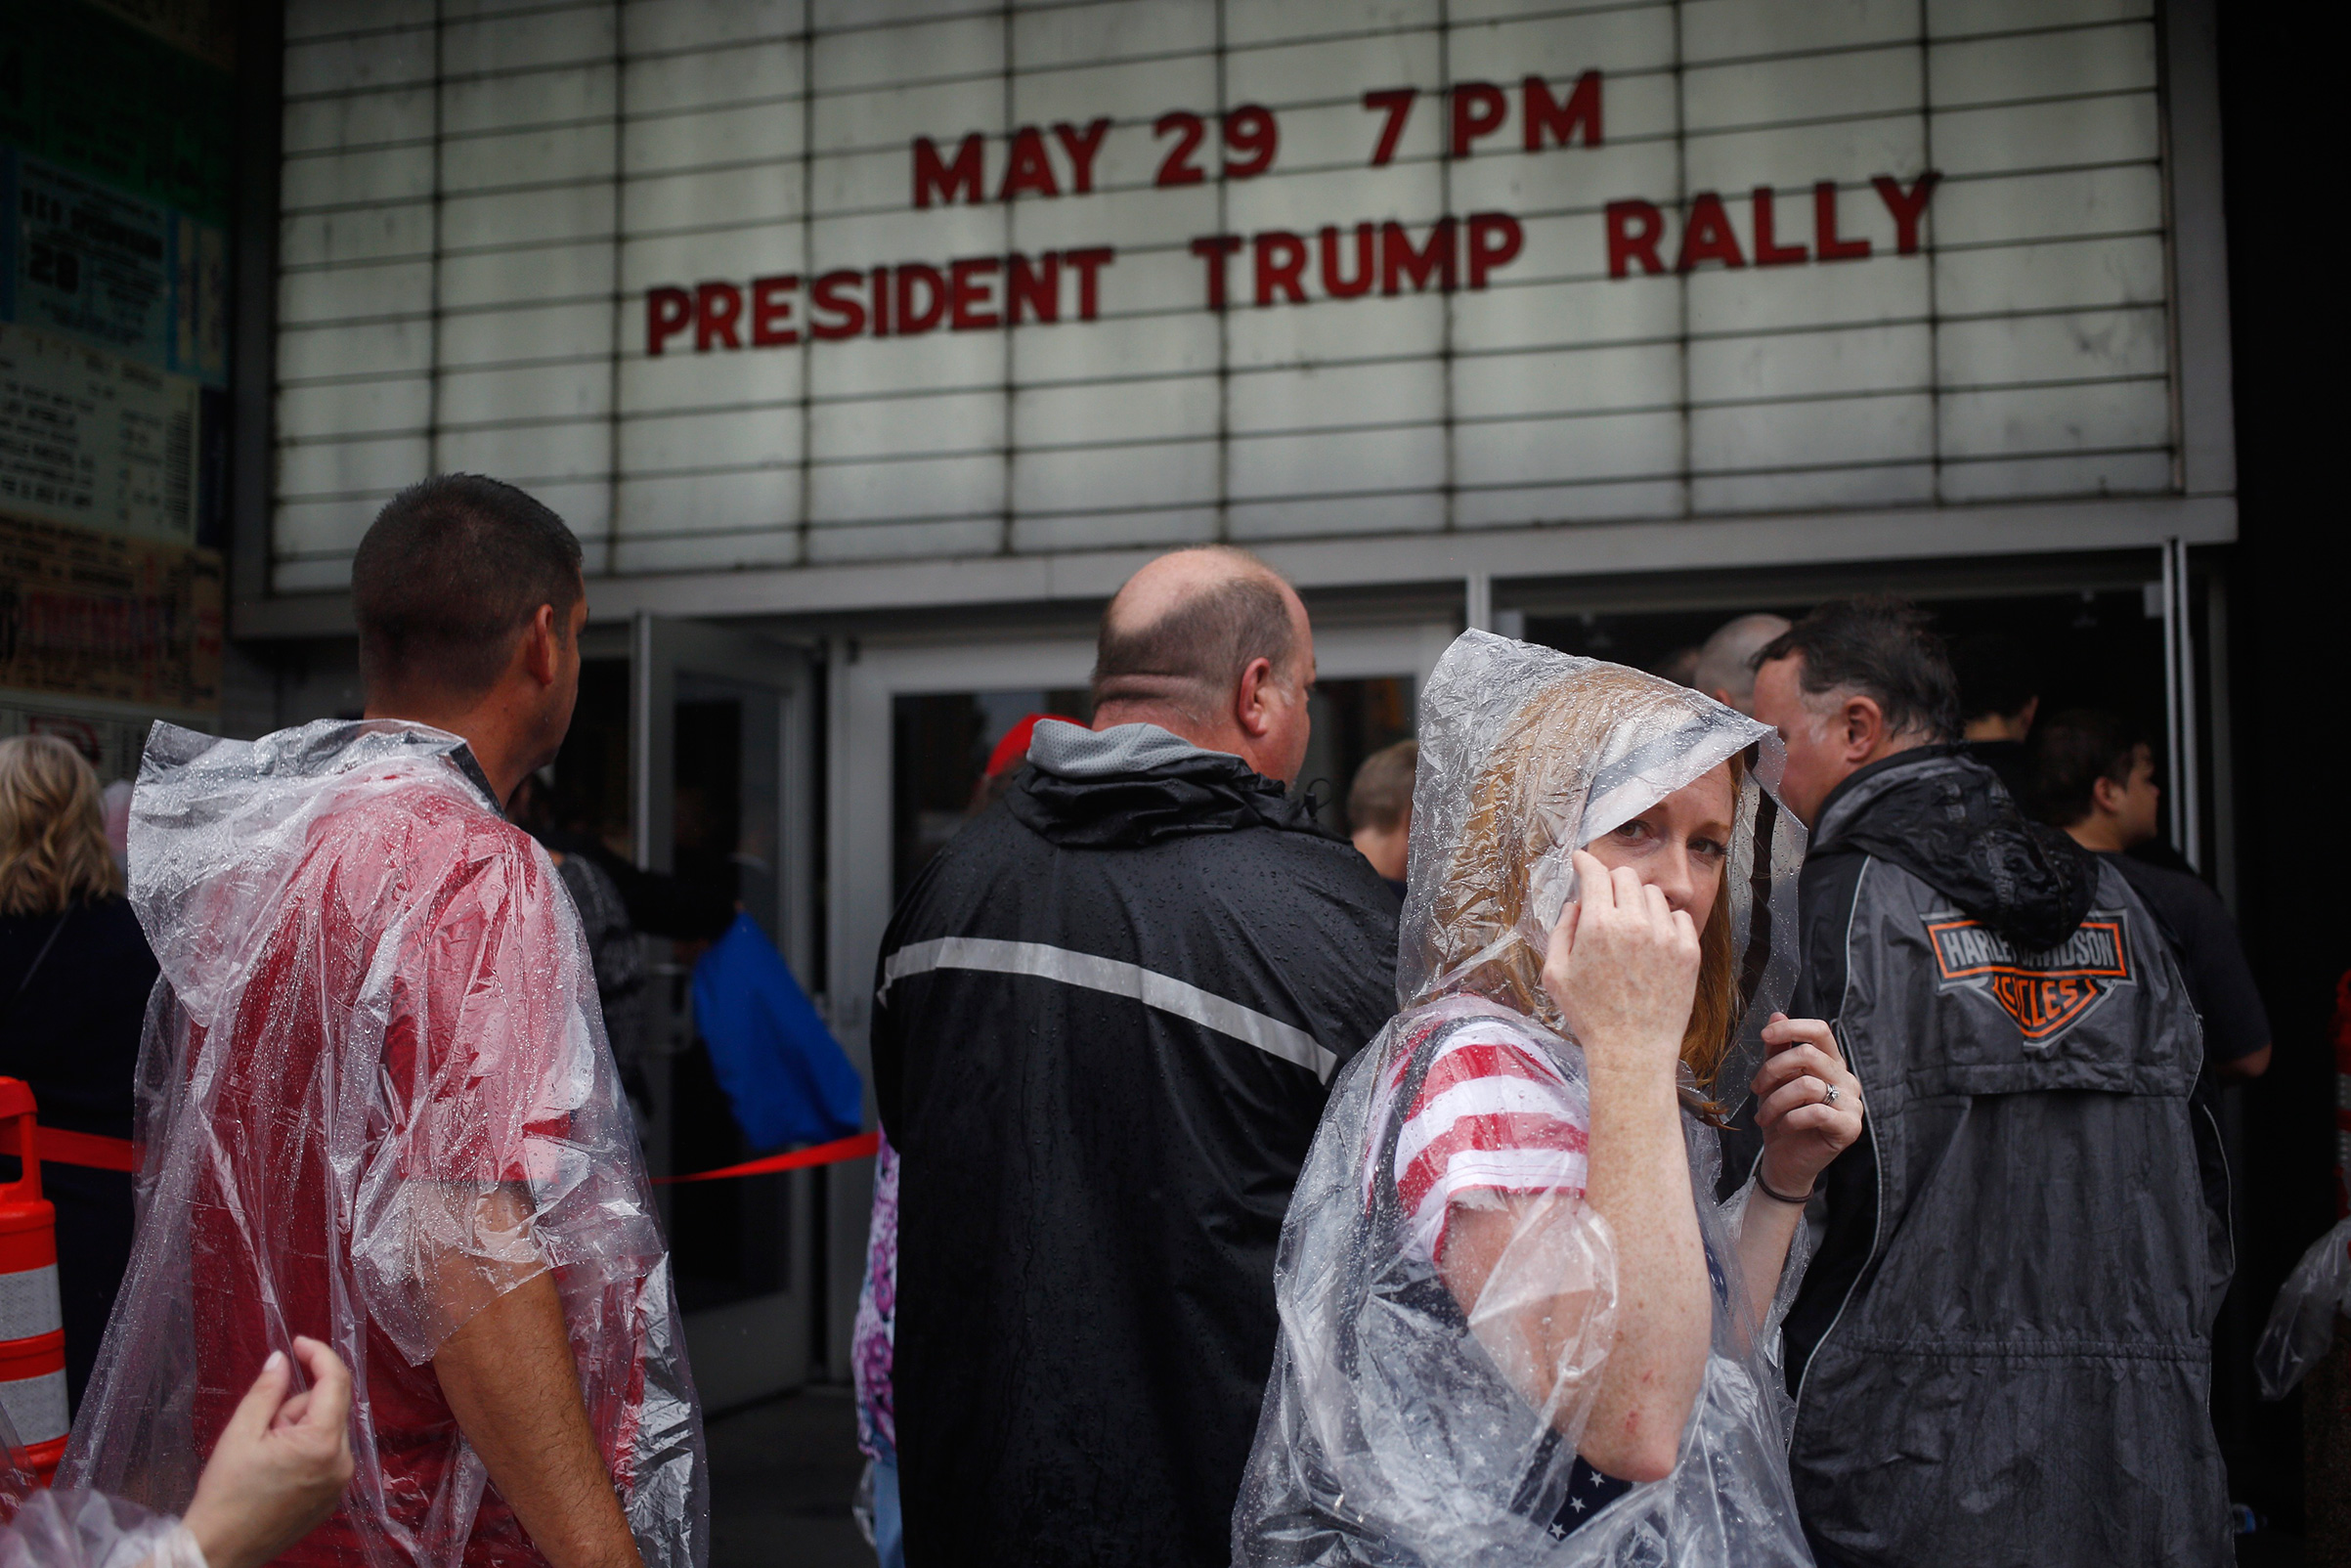 The line outside a Trump rally in Nashville in the spring. Trump’s 2016 victory continued the GOP’s dominance of Southern politics (Luke Sharrett—Bloomberg/Getty Images)